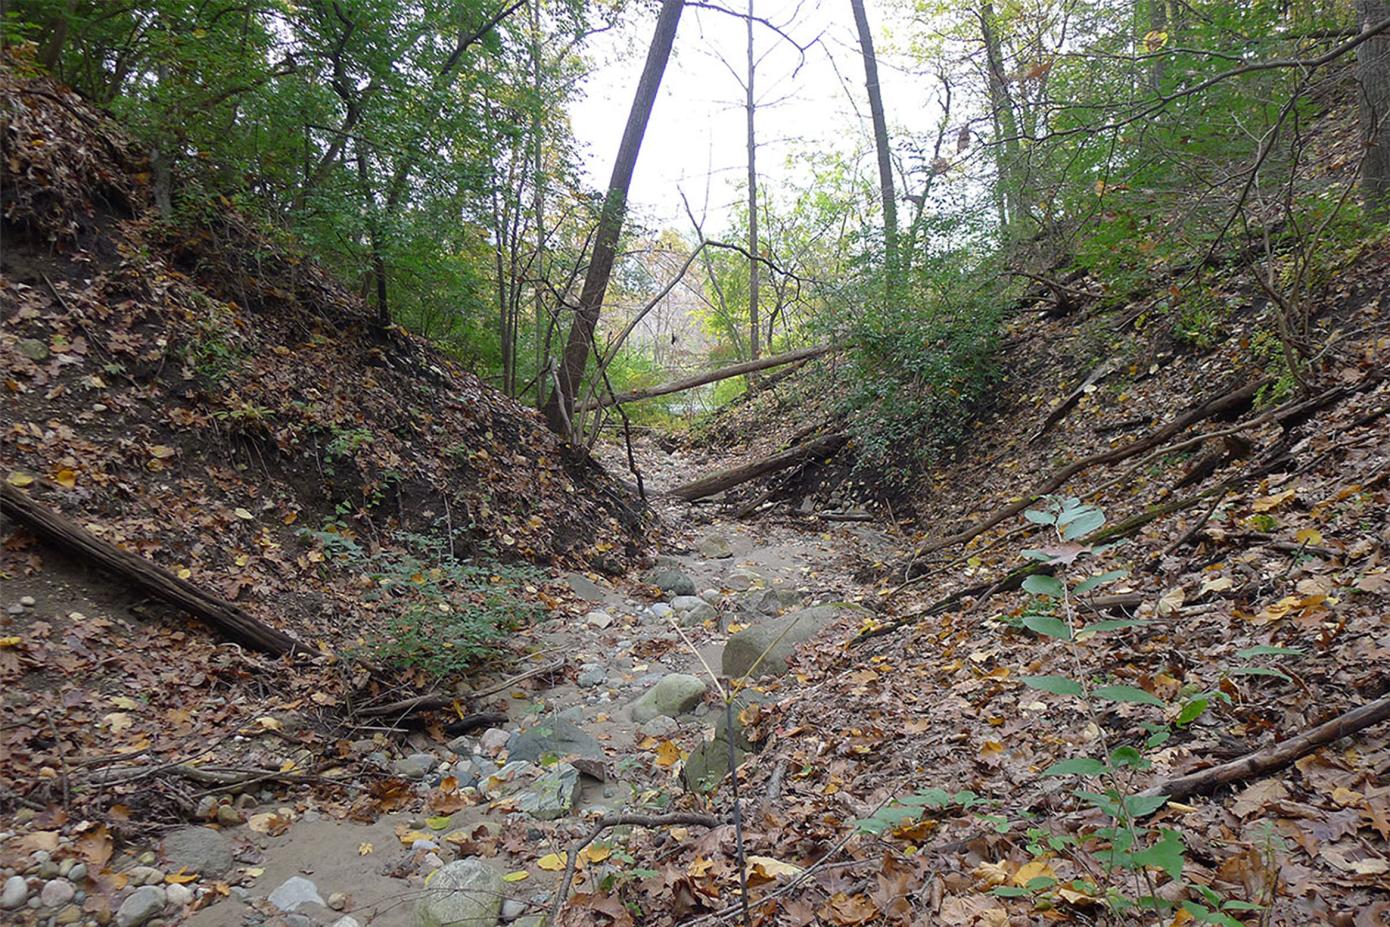 A view of a small gully carved out by water